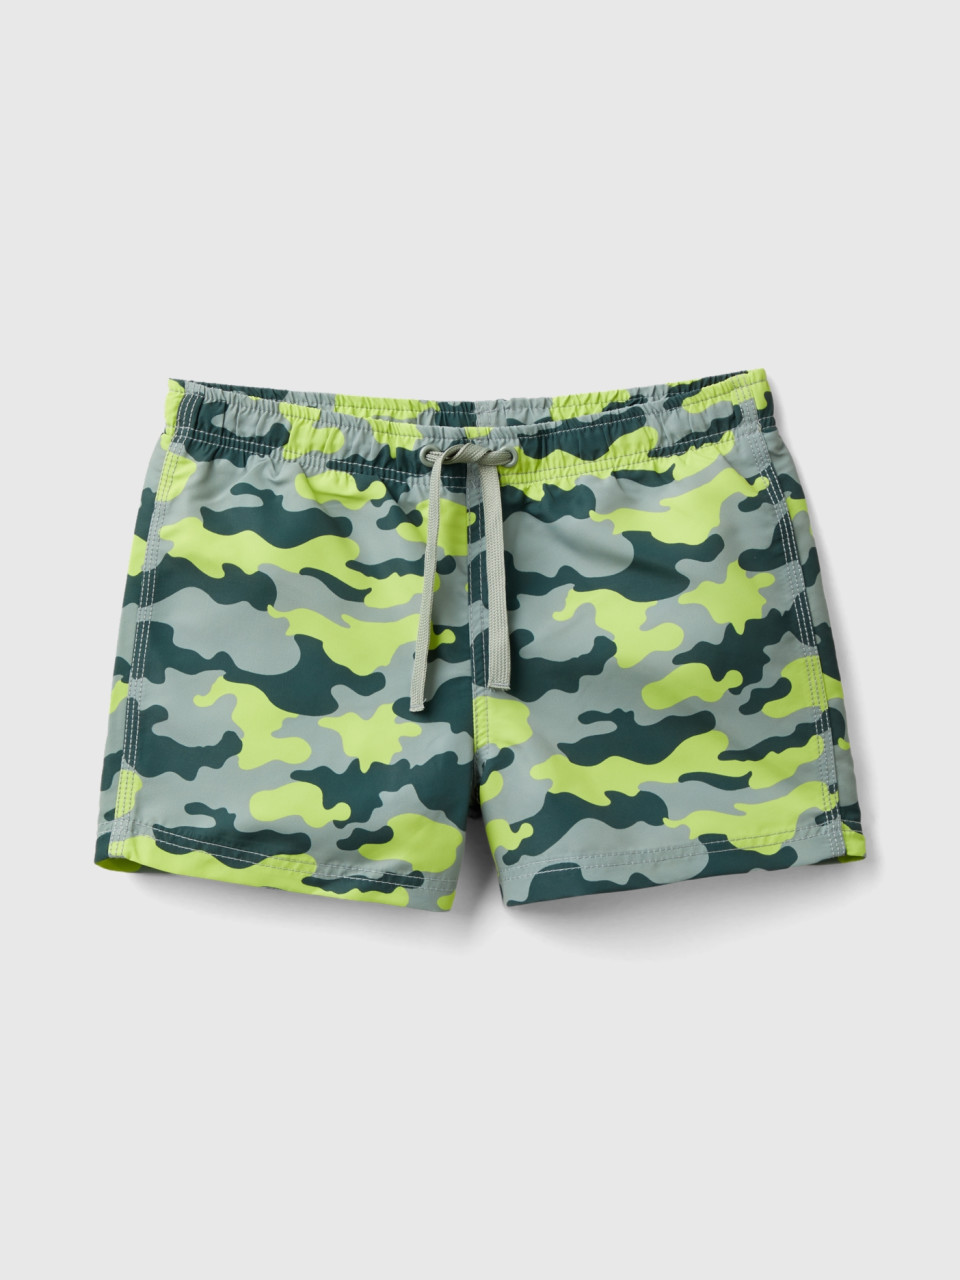 Benetton, Swim Trunks With Camouflage Print, Multi-color, Kids